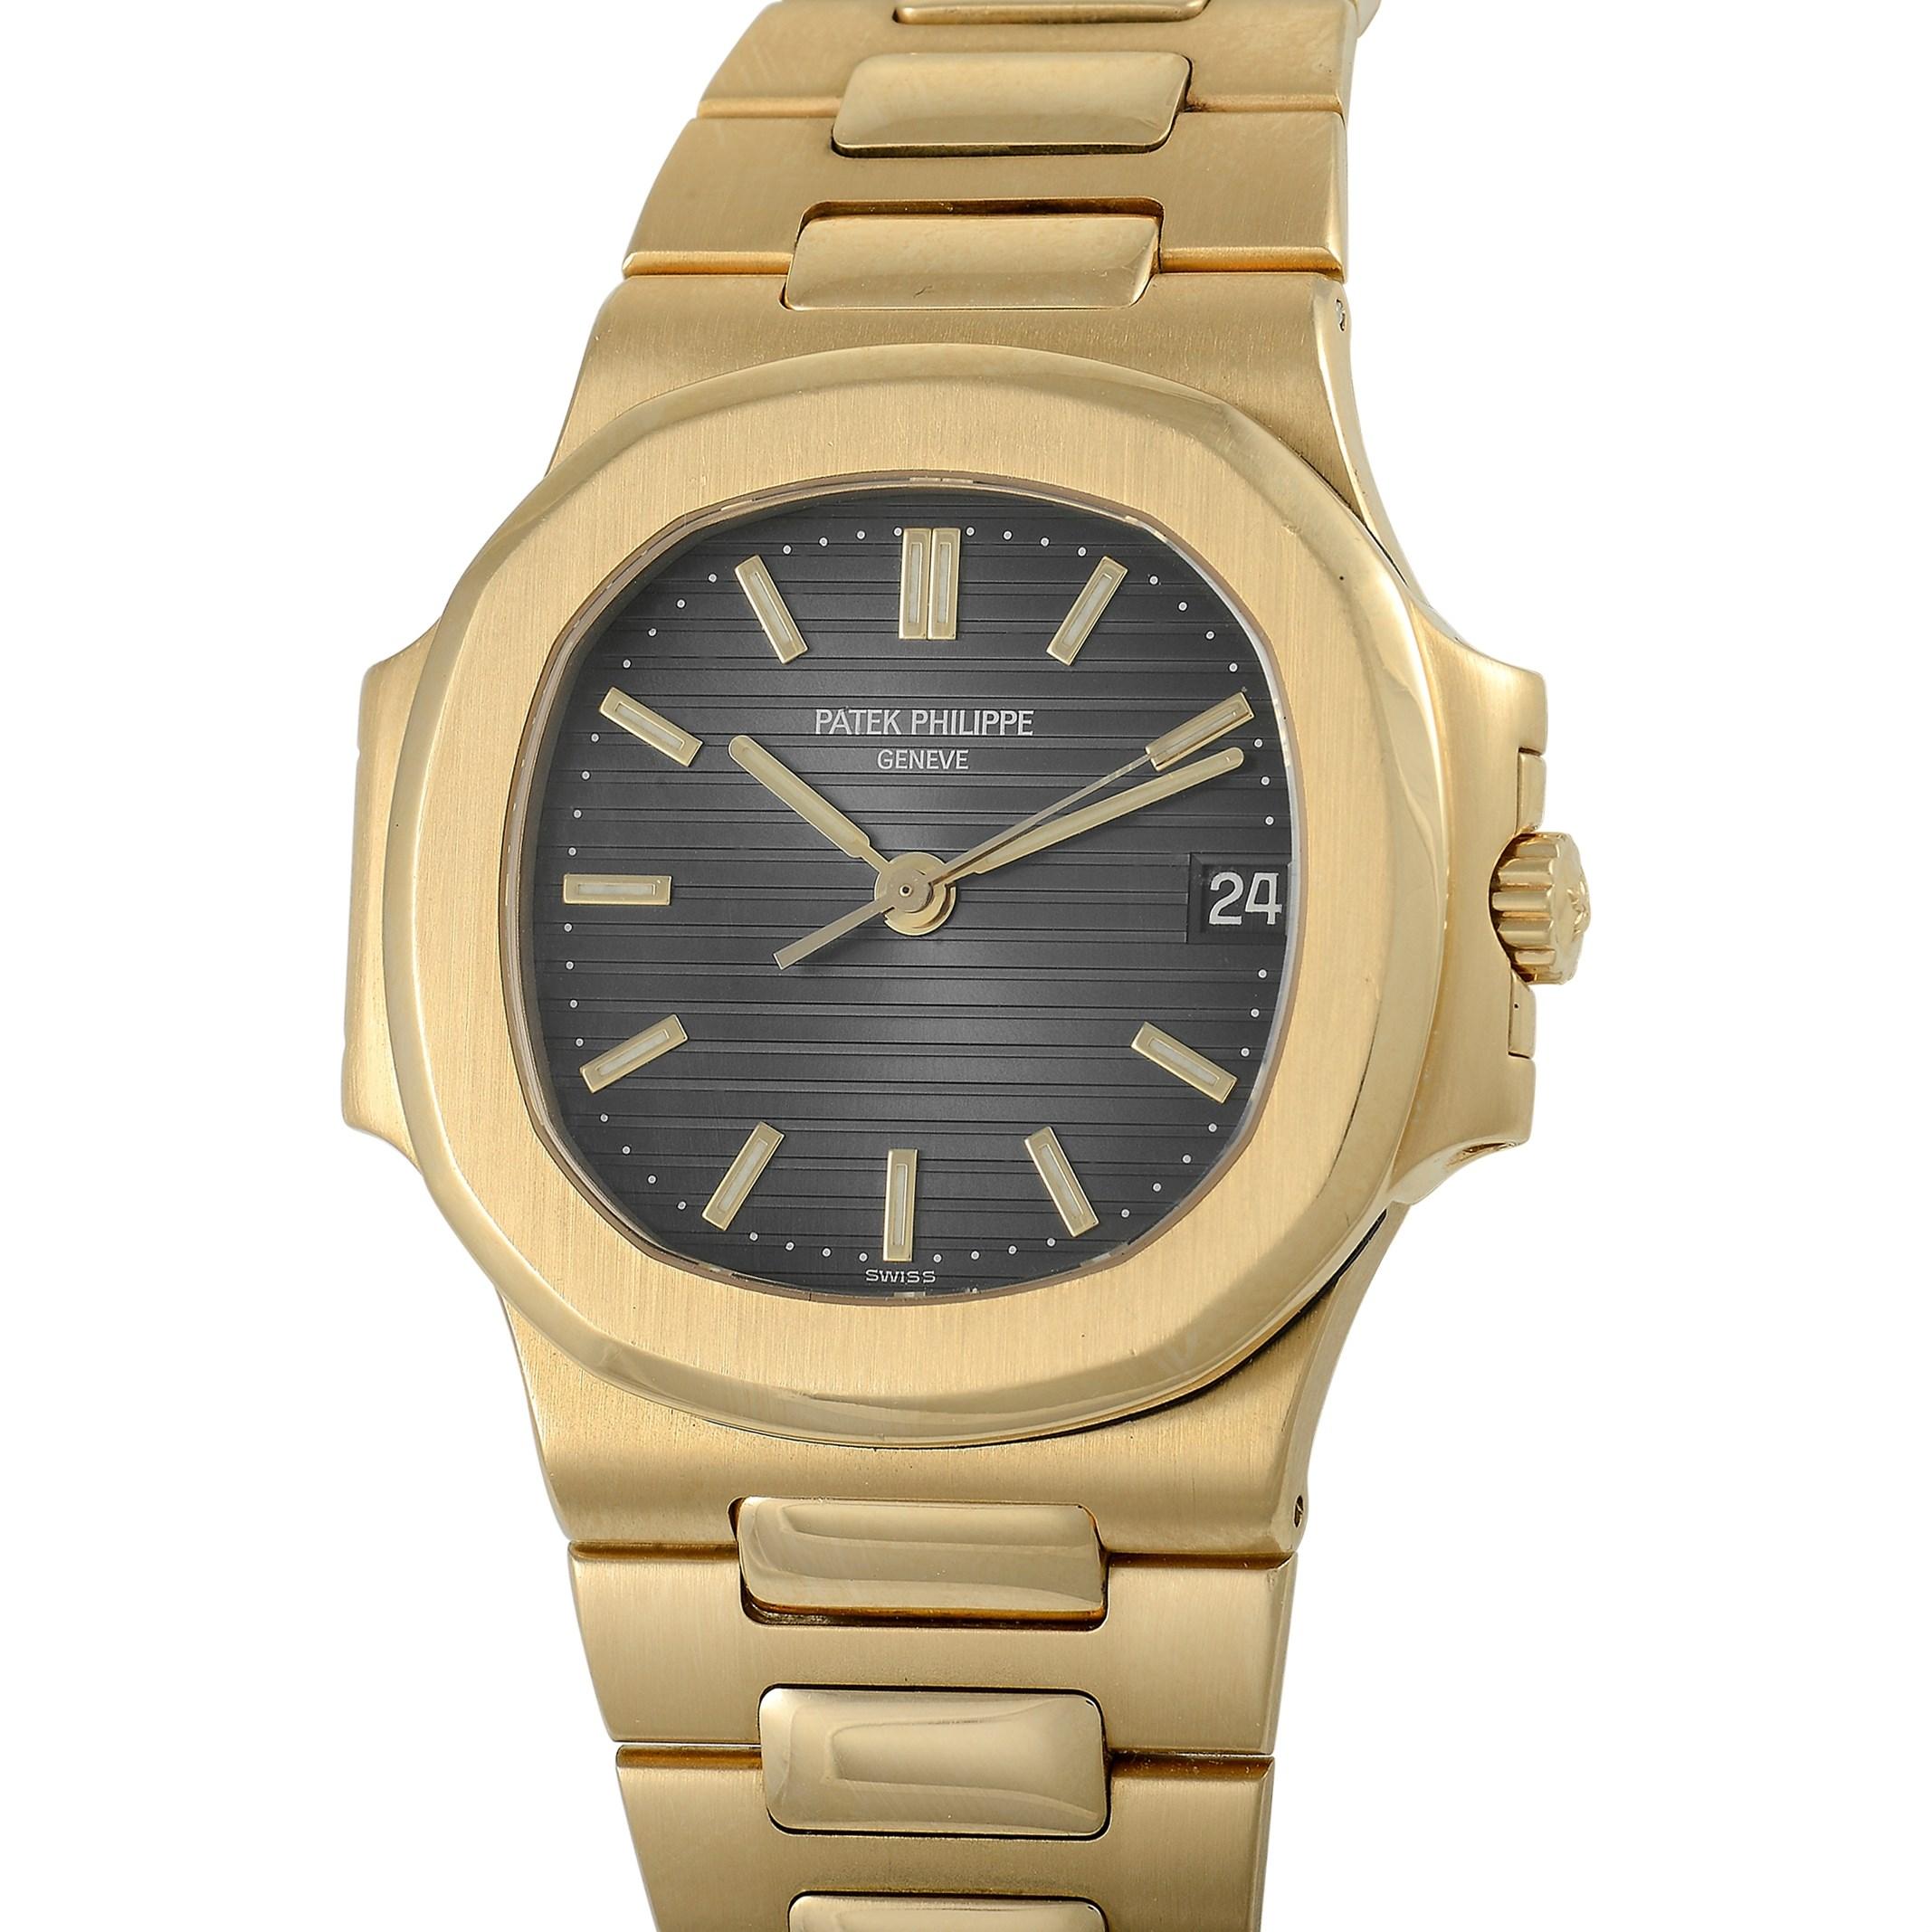 The Patek Philippe Nautilus was first introduced to the world over 45 years ago, and it’s been growing in popularity ever since. The original piece was designed by Gérald Genta who also designed other significant timepieces, including the Audemars